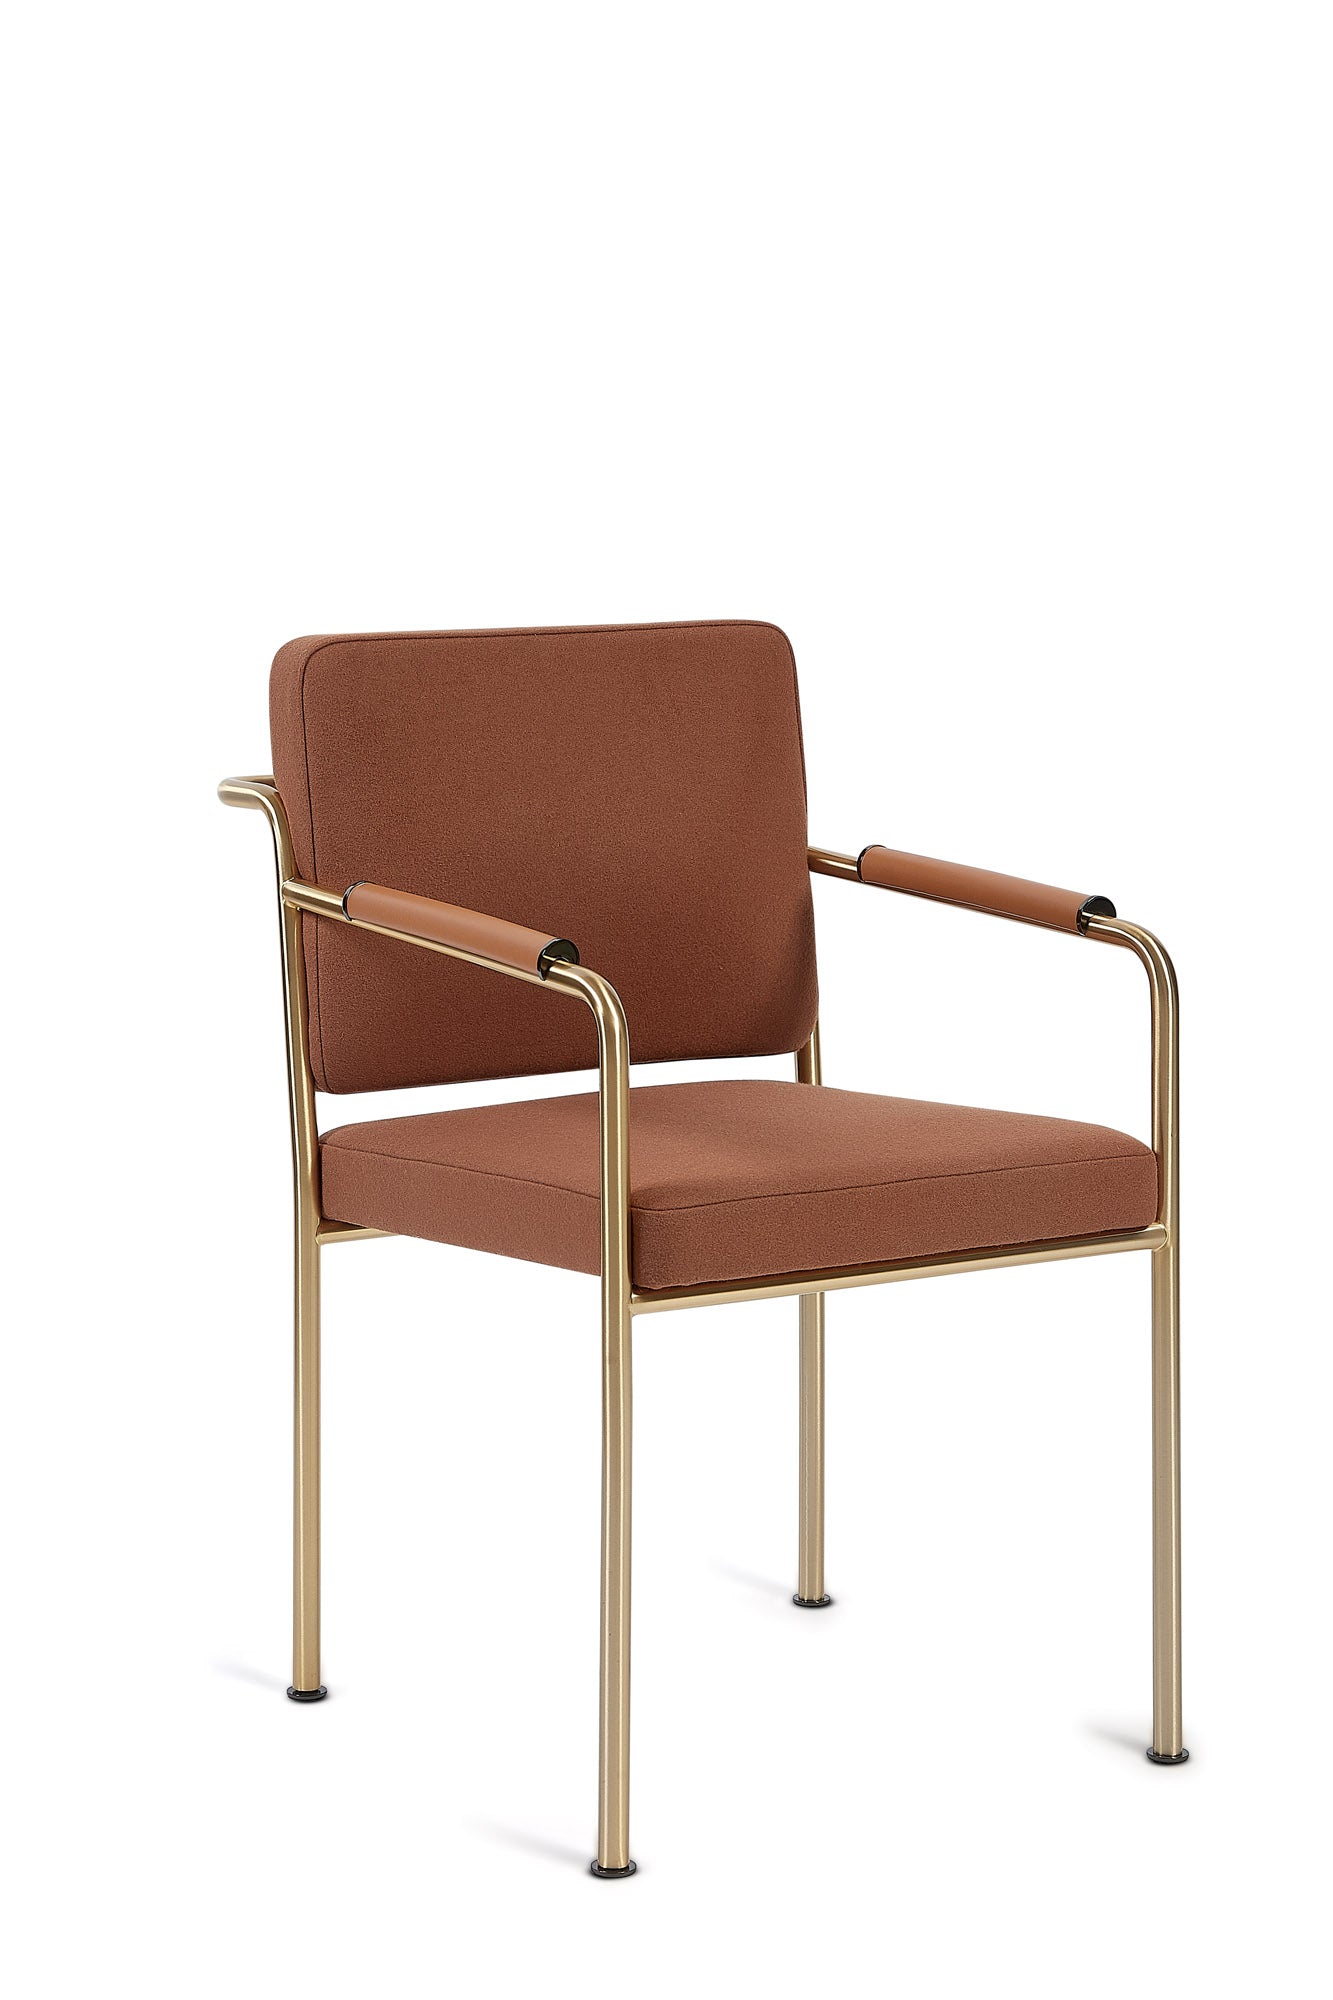 Monforte chair with armrests